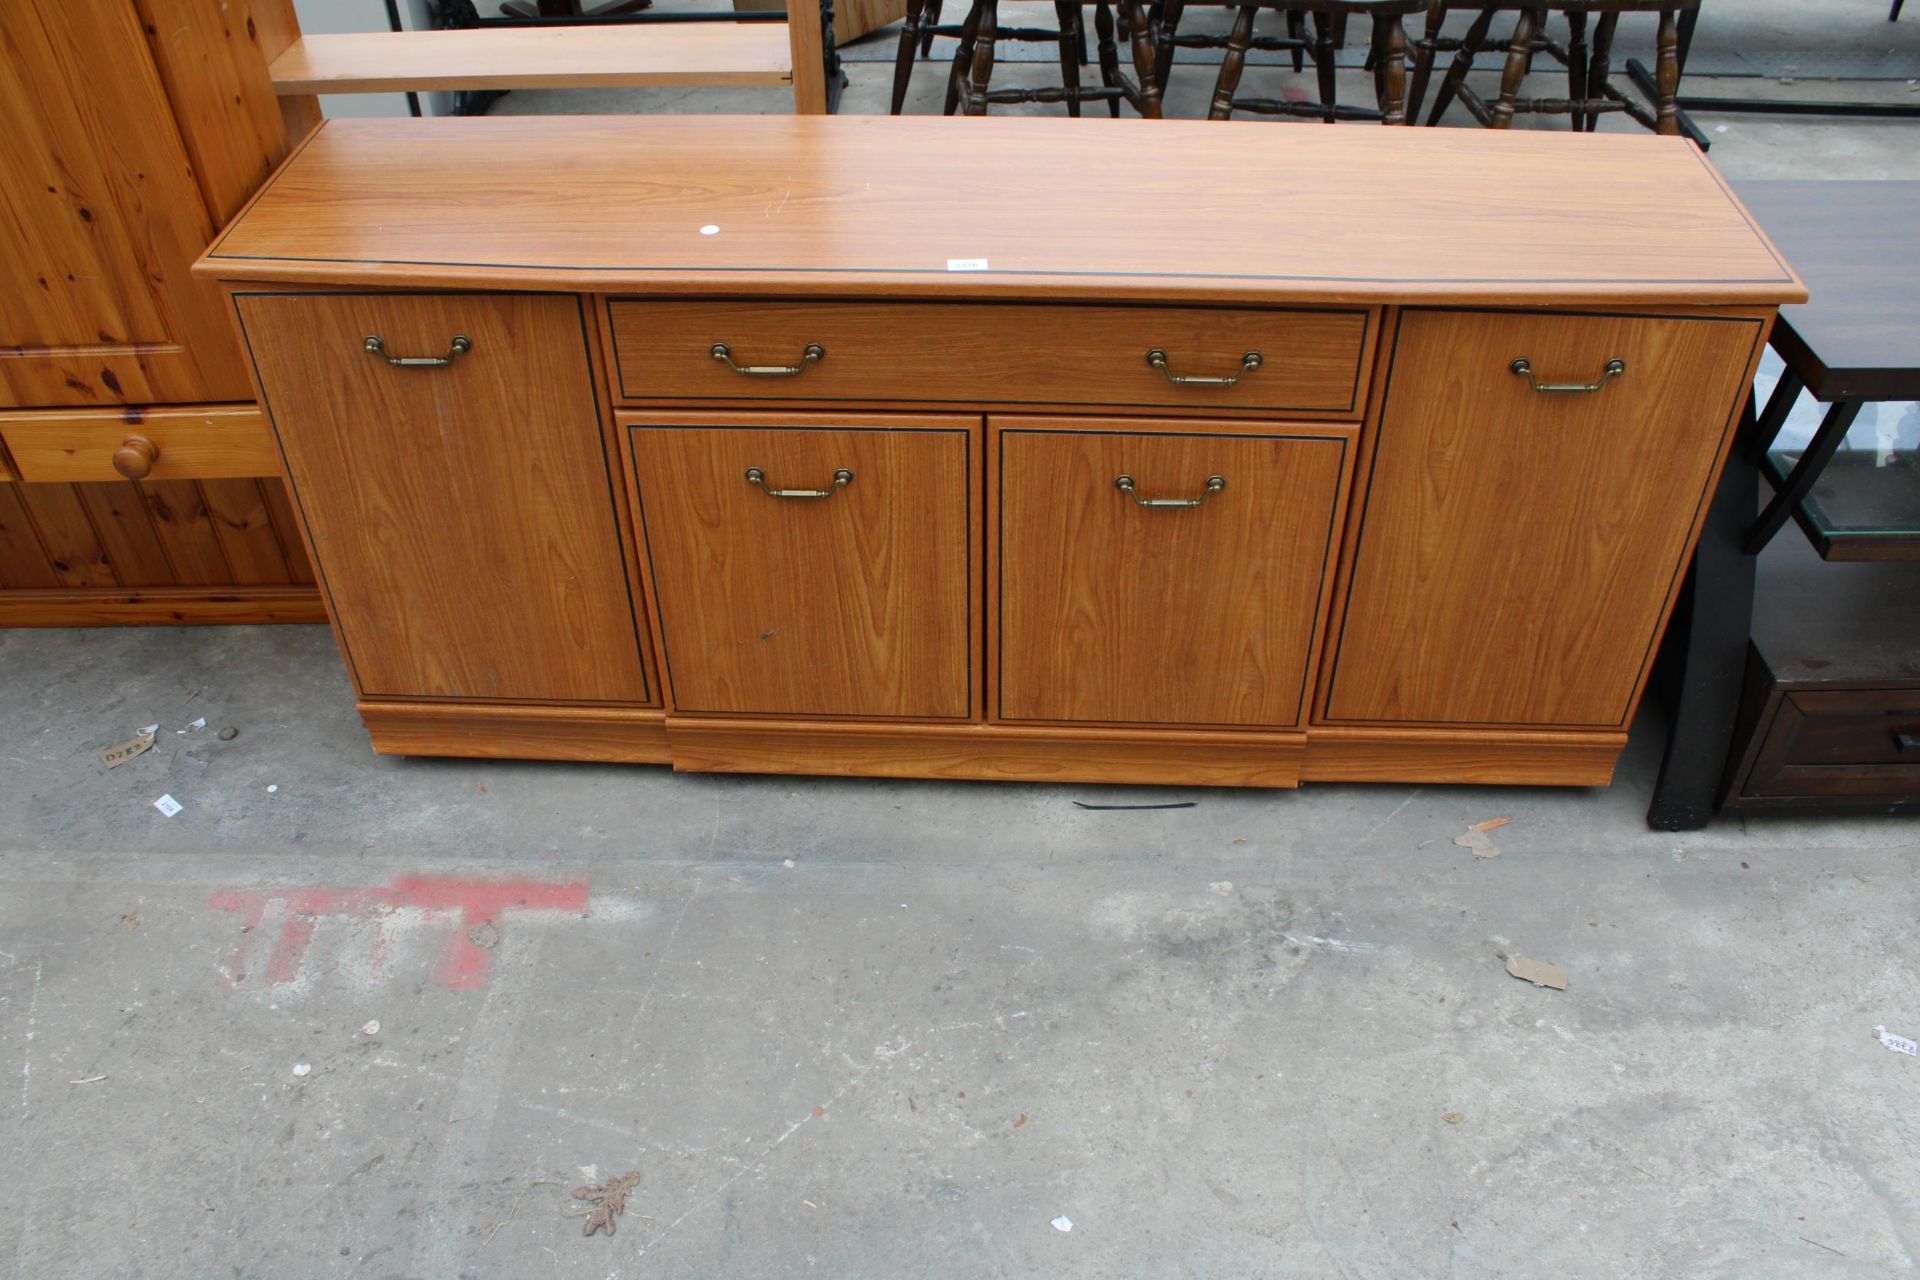 A WOODBERRY BROS AND HAINES SIDEBOARD 64" WIDE